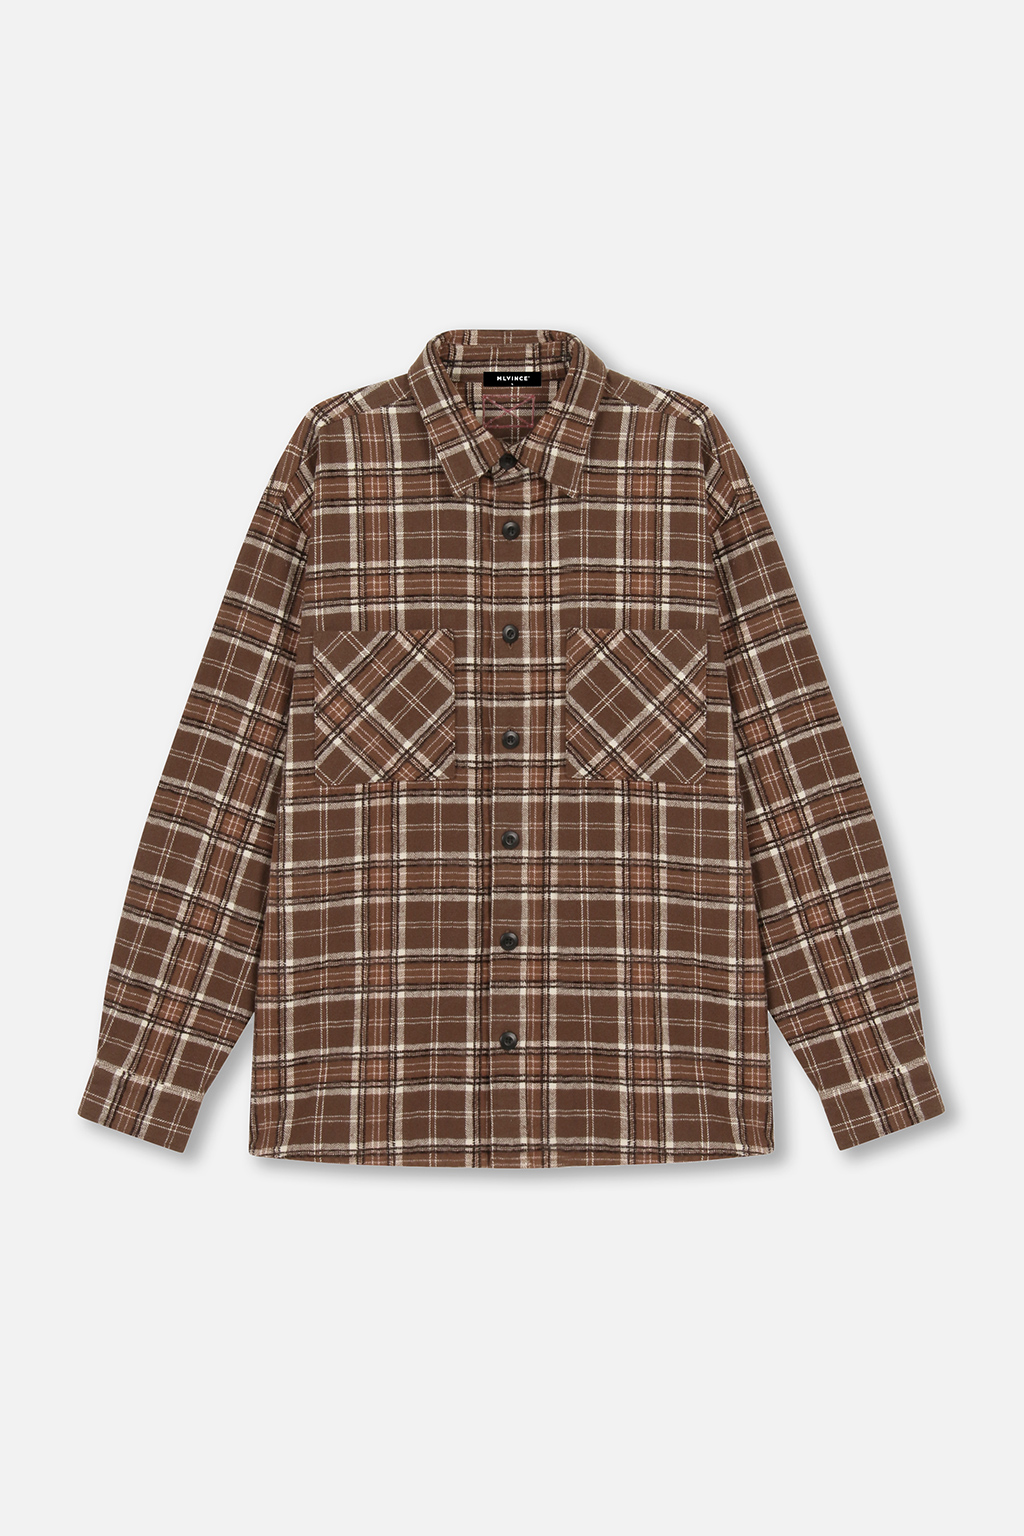 FLANNEL CHECK SHIRT - BROWN - MLVINCE